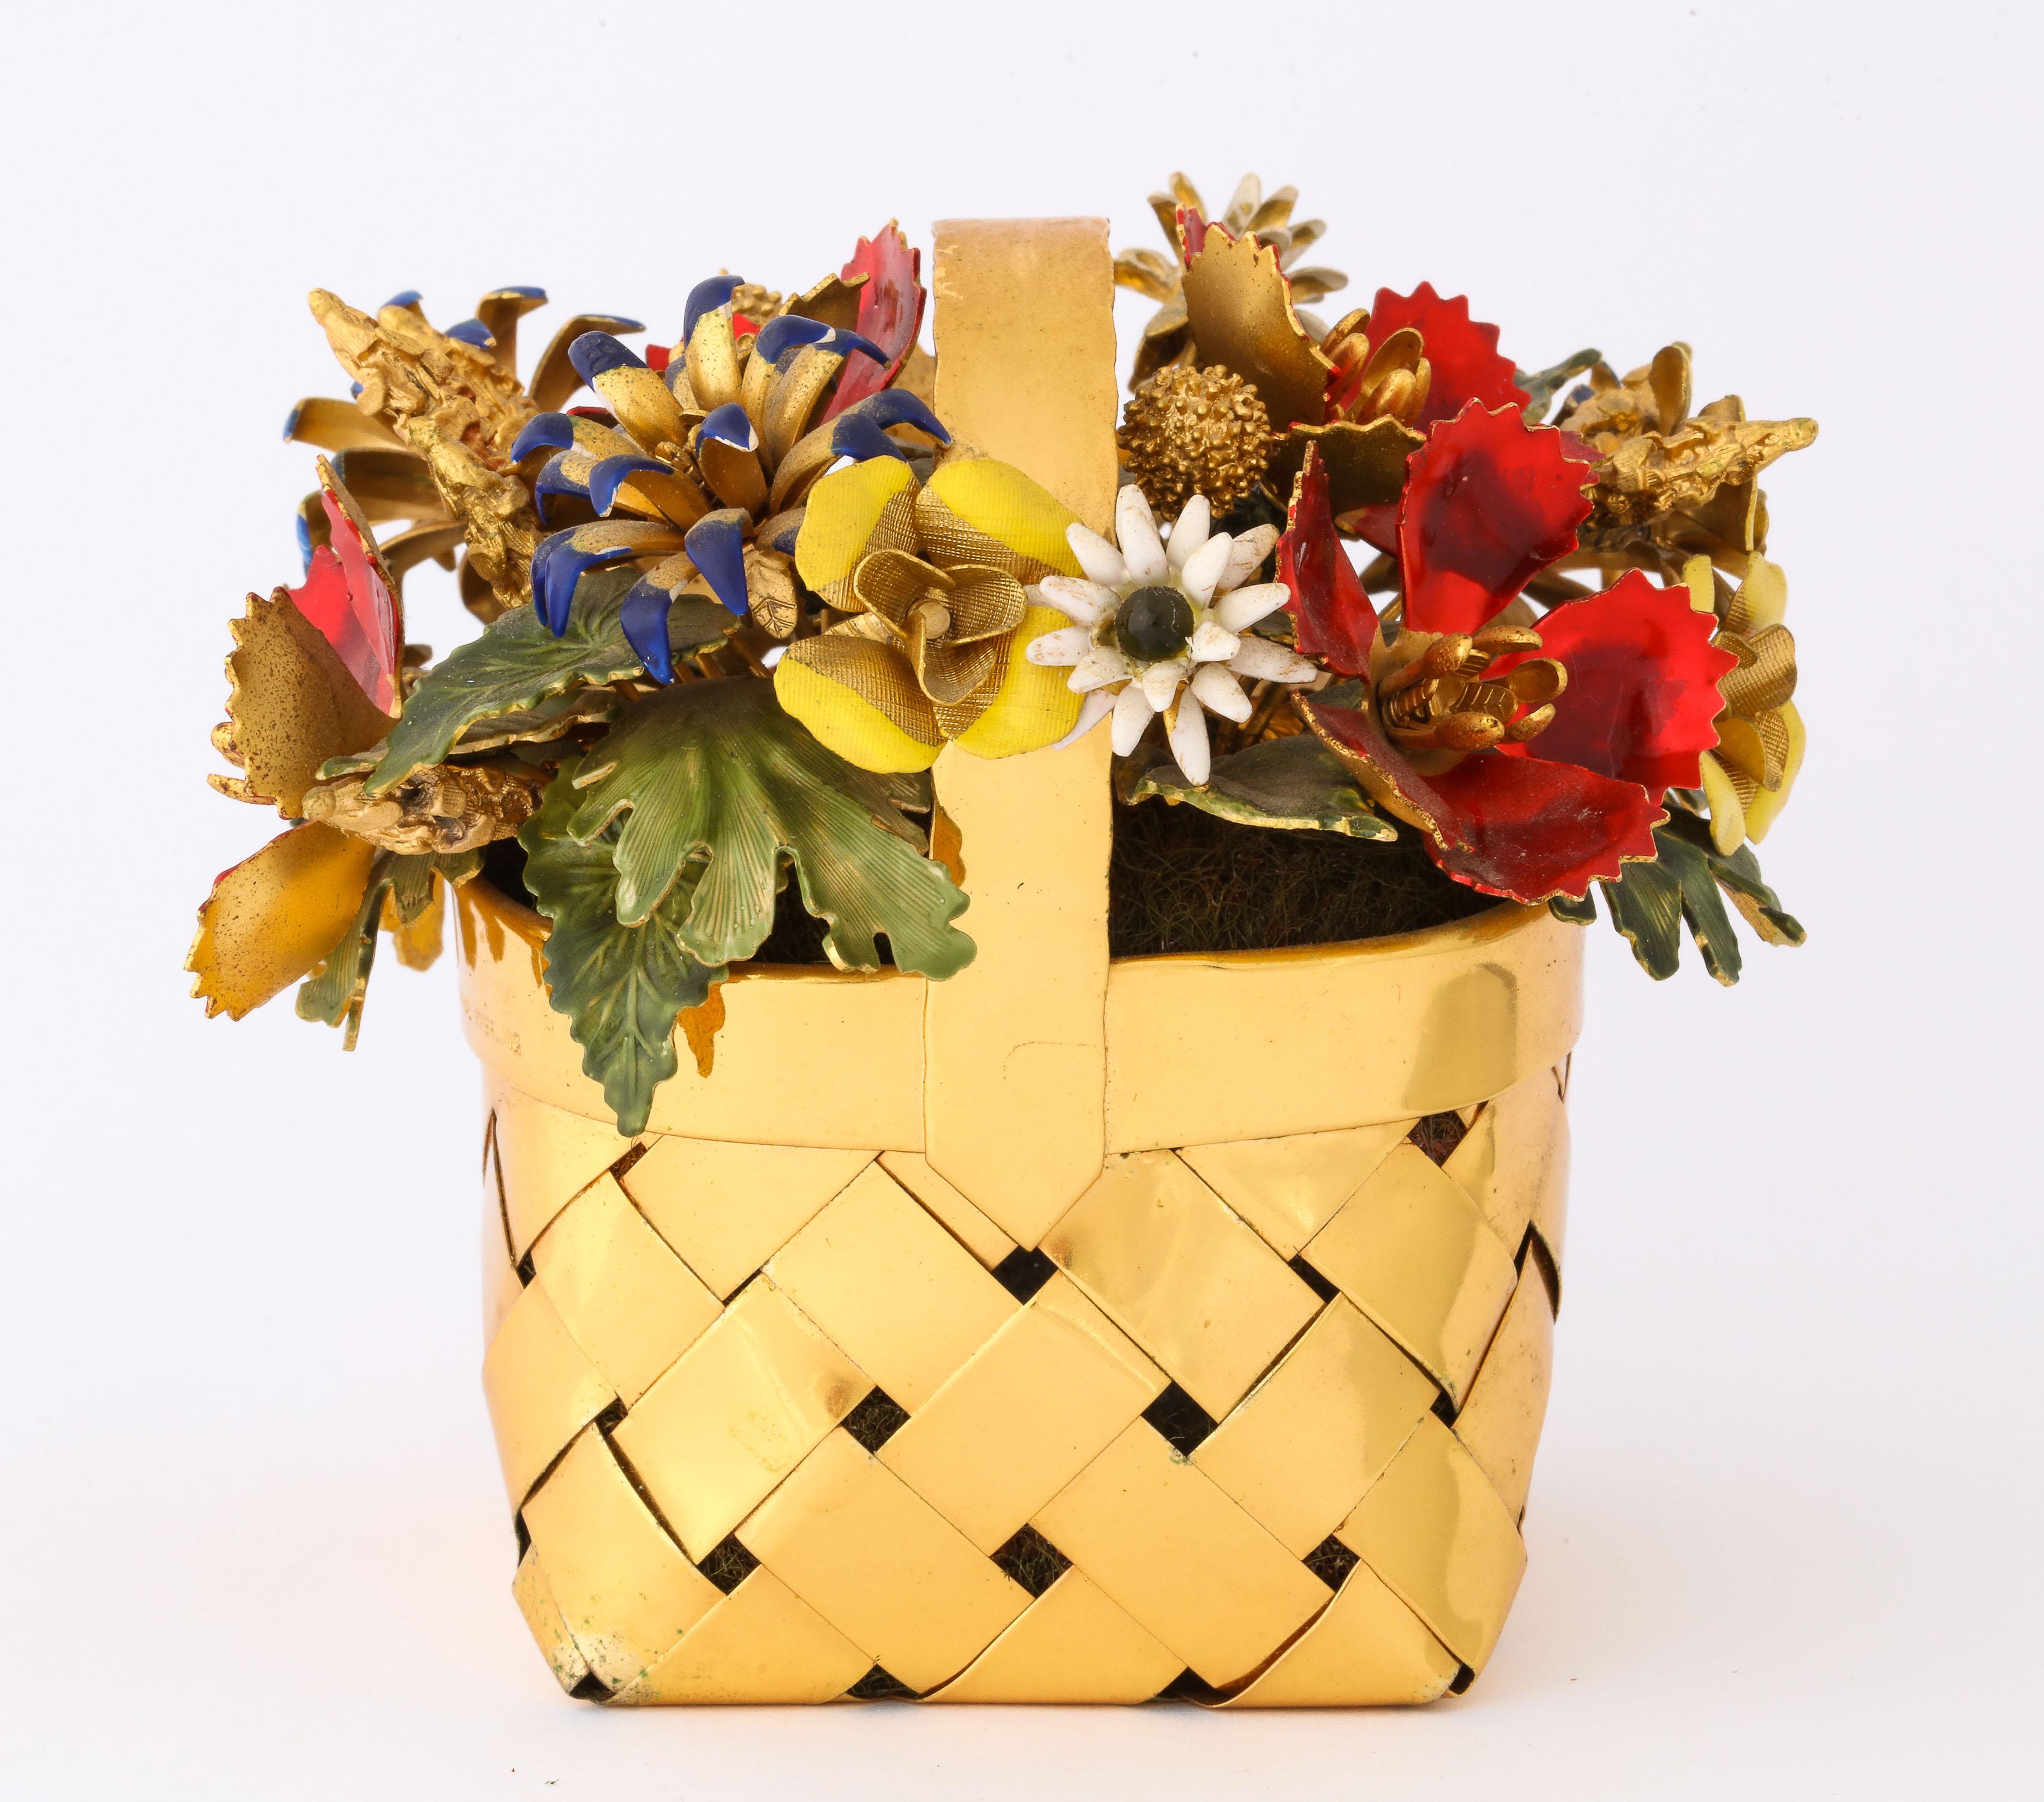 Sterling Silver-Gilt and Enamel Table Ornament Basket by Cartier 1